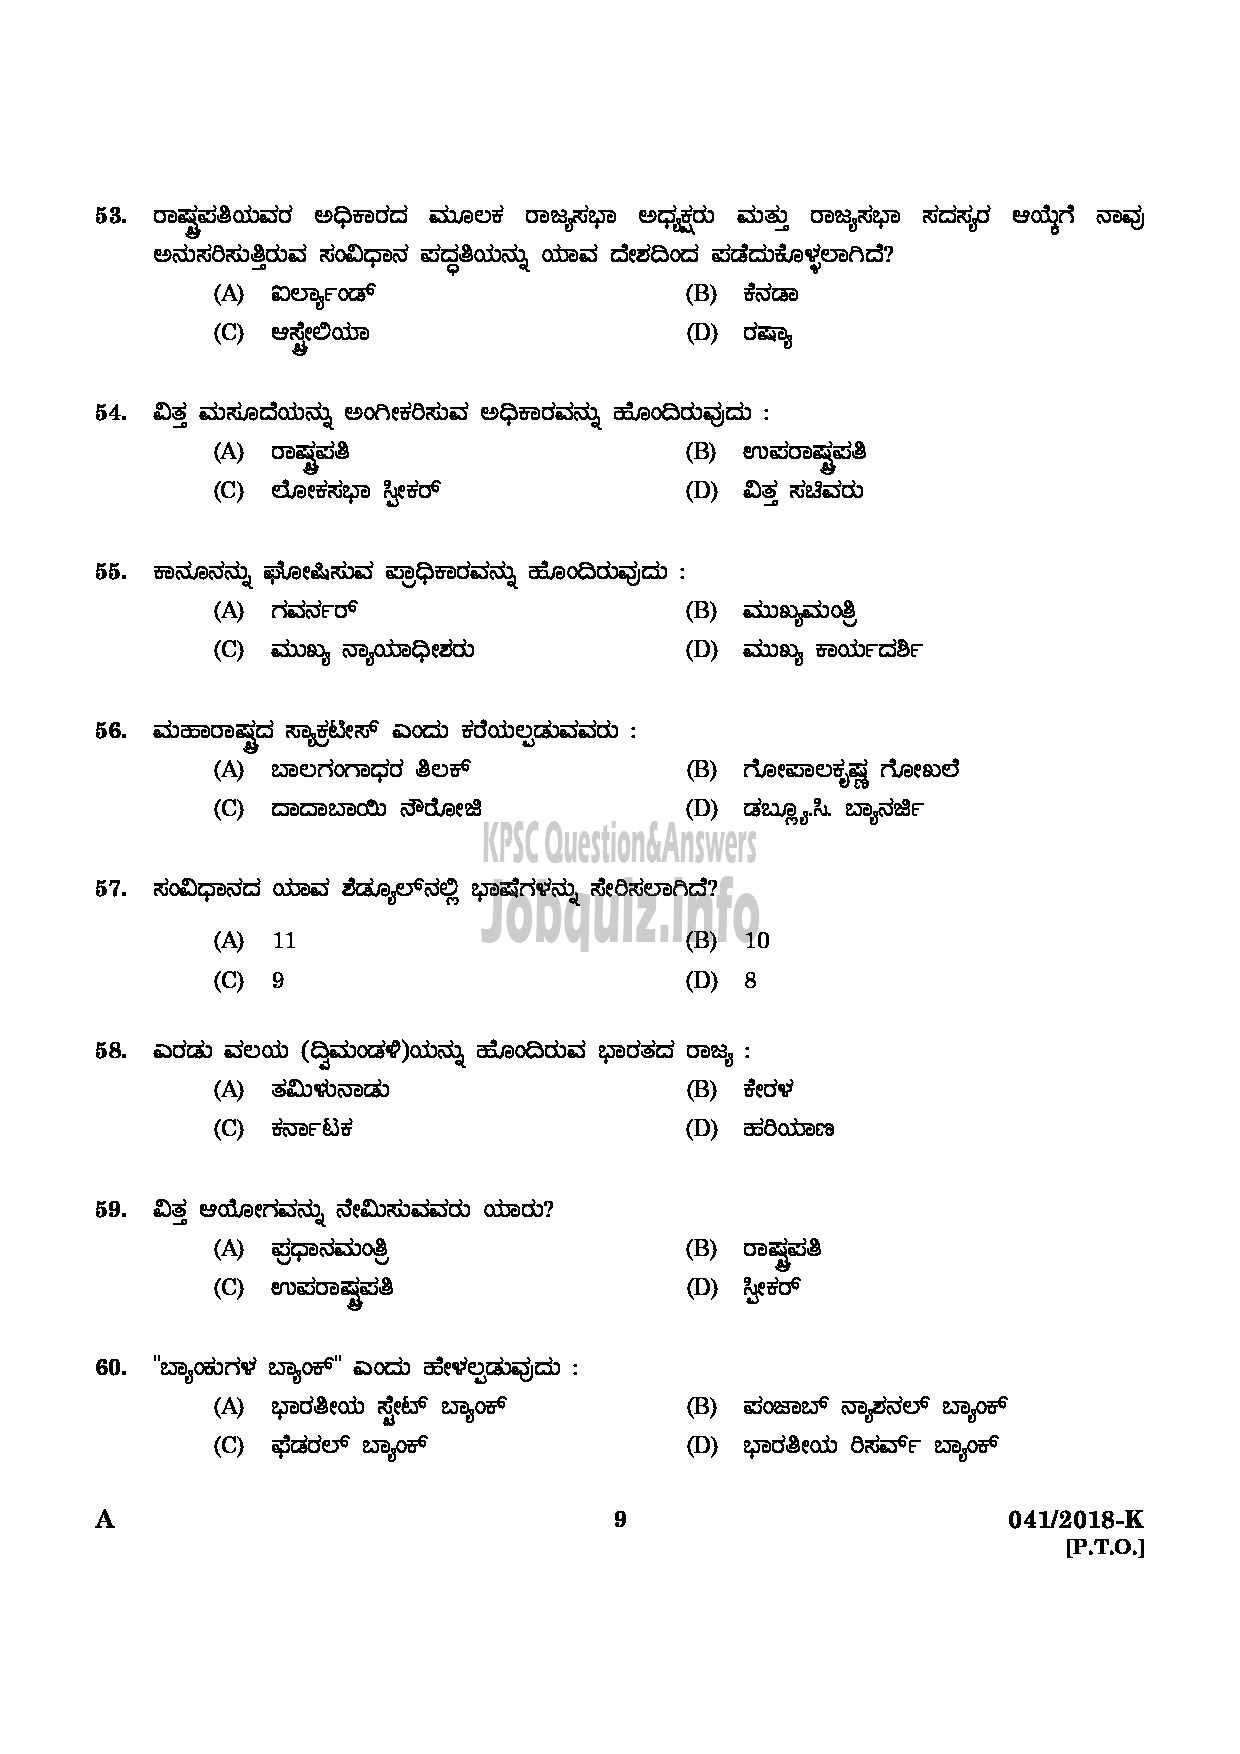 Kerala PSC Question Paper - WOMEN POLICE CONSTABLE NCA LC/AI AND MUSLIM POLICE KANNADA-7